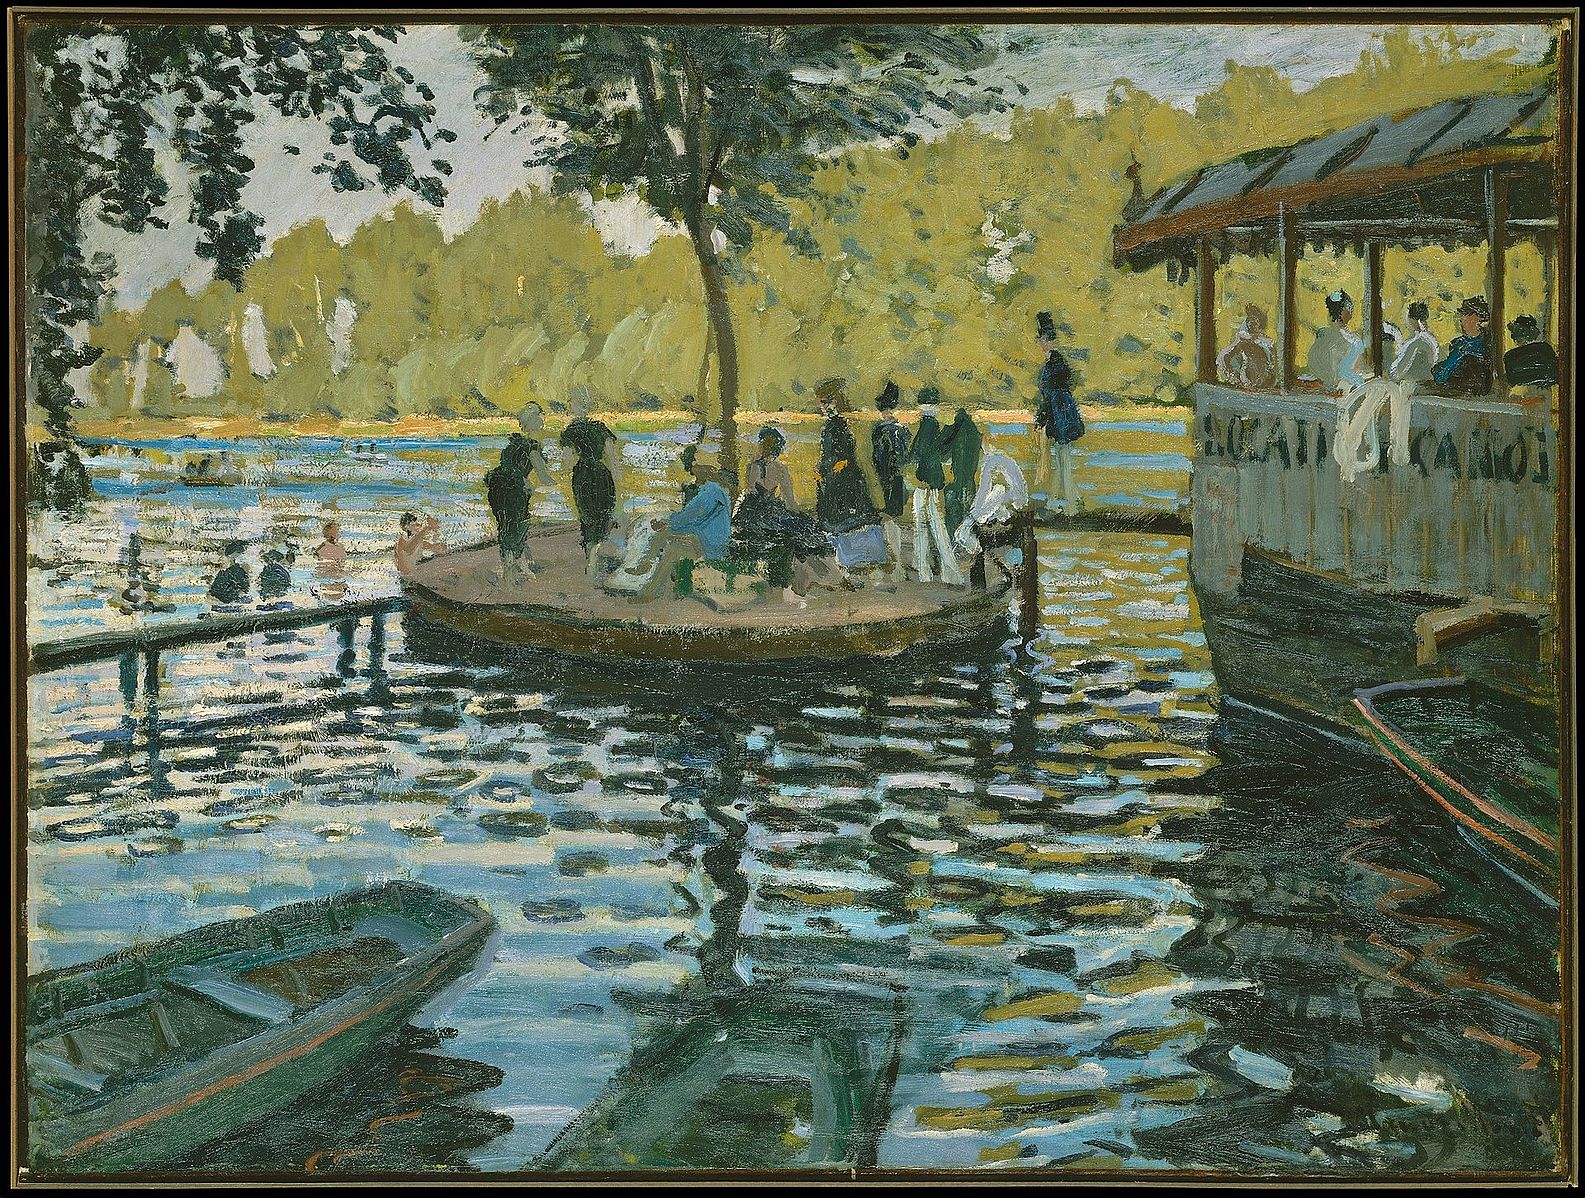 A group of people sitting on a floating dock with trees and the river